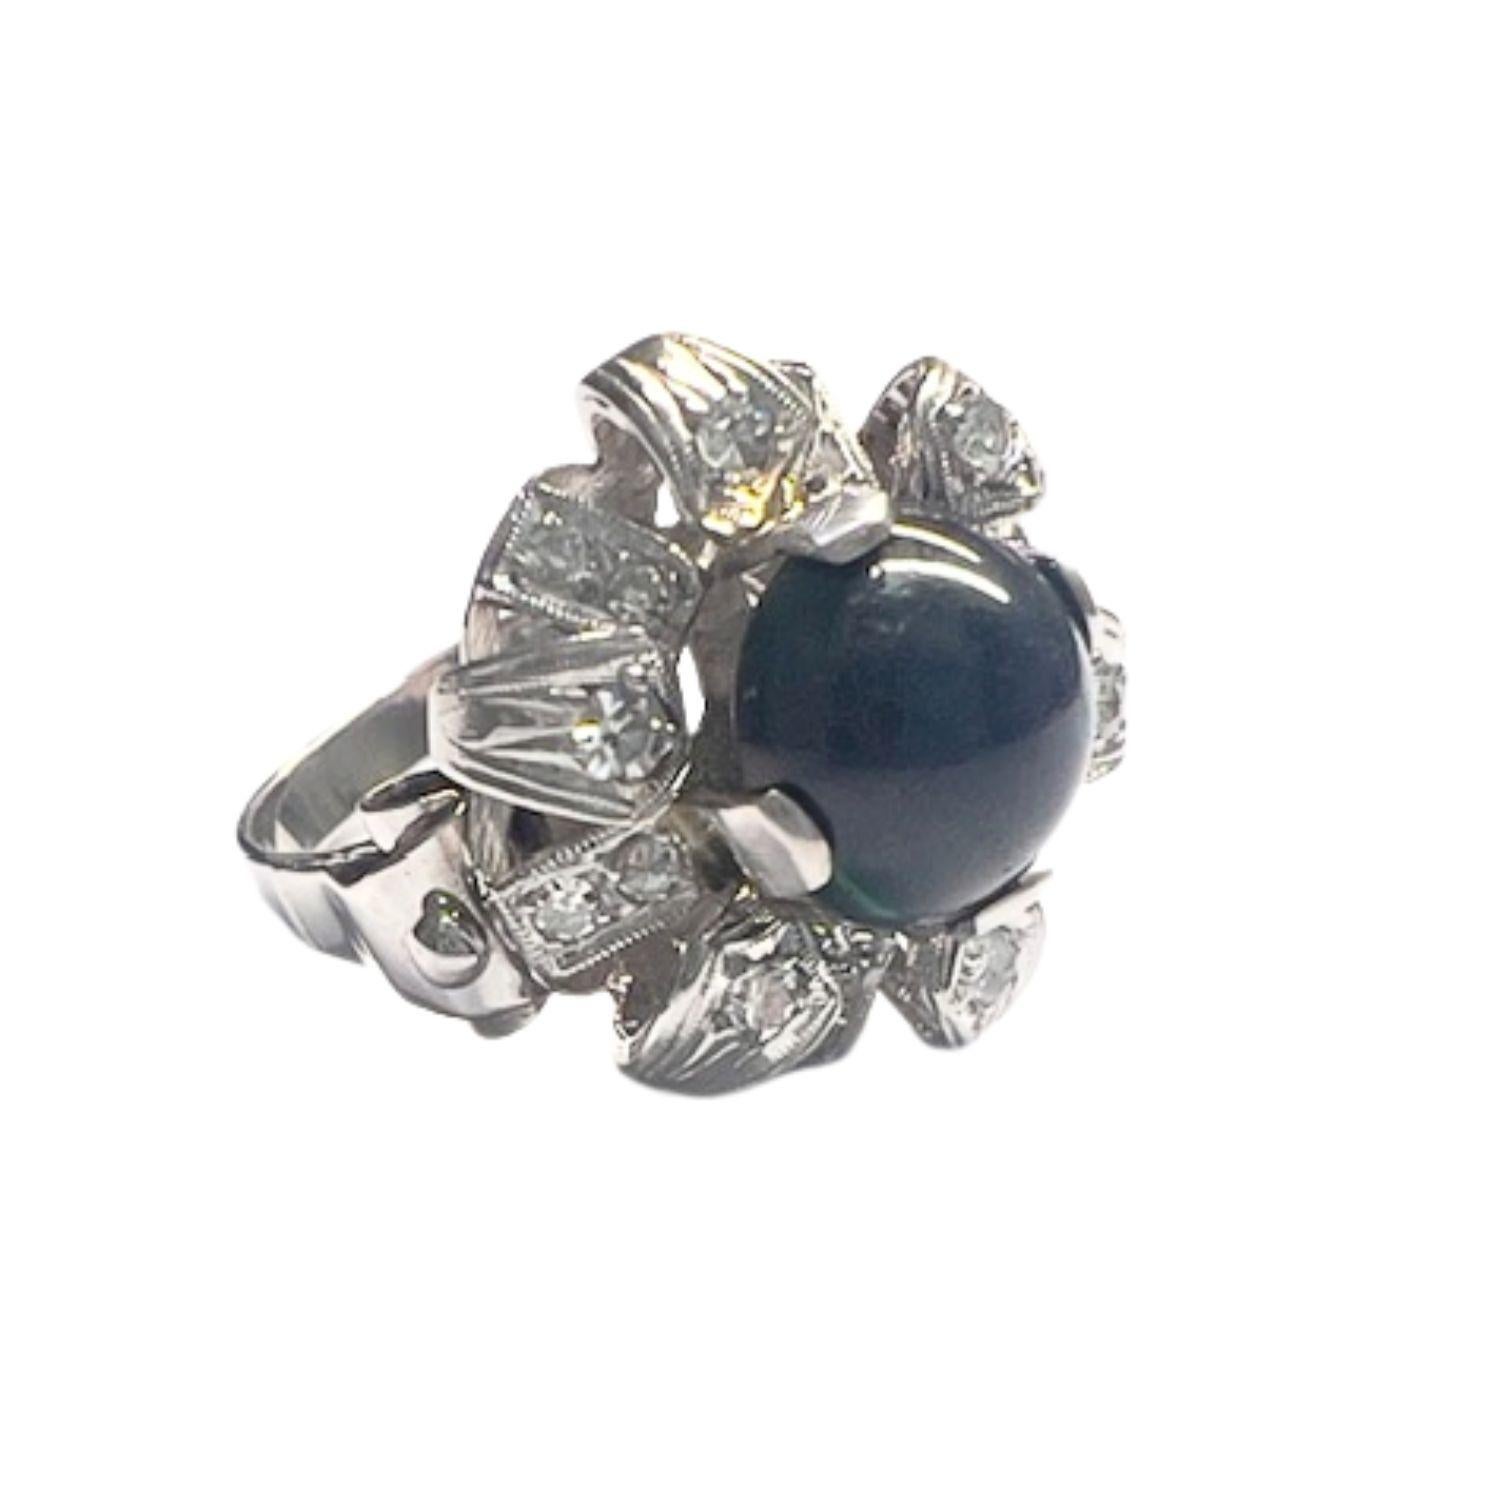 Women's 1930s-1935 Art Deco with Diamonds and Diffusion-Treated Sapphires 18k Gold Ring For Sale